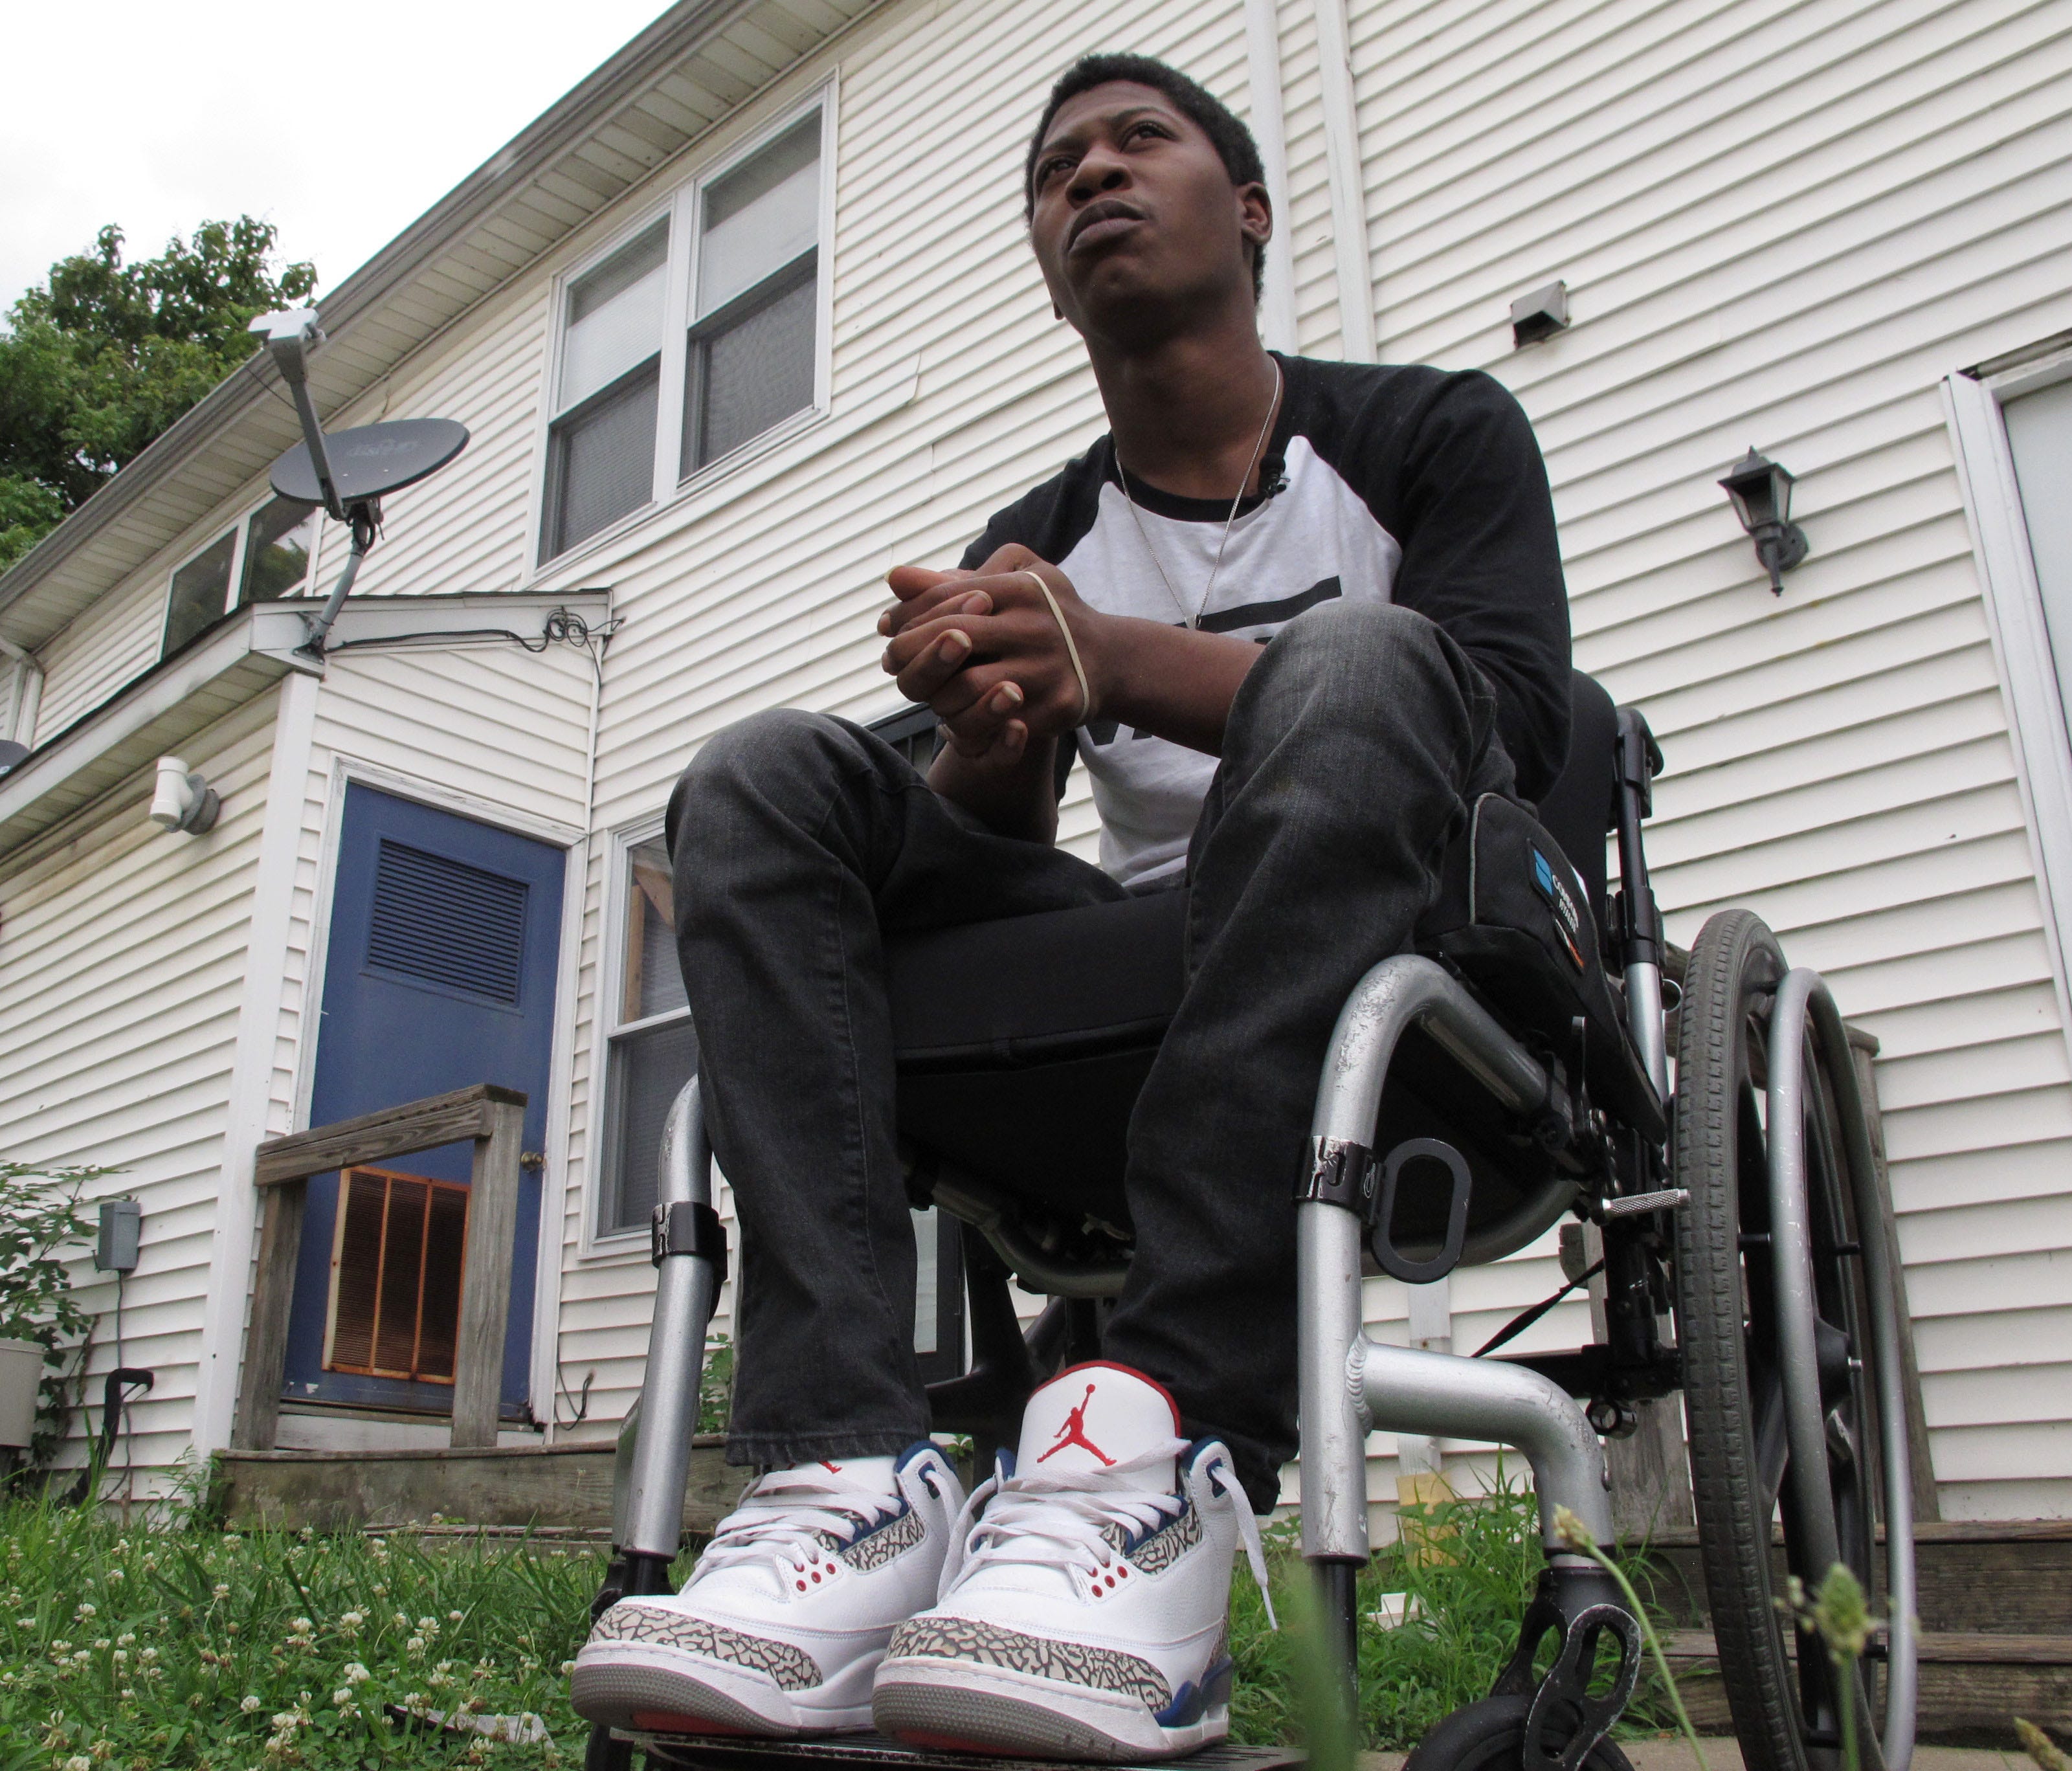 Rayquan Briscoe sits outside his home in Wilmington, Del. July 25, 2017. Two years ago, when he was 17, Briscoe was hit in the back by a stray bullet, leaving him paralyzed from the waist down.